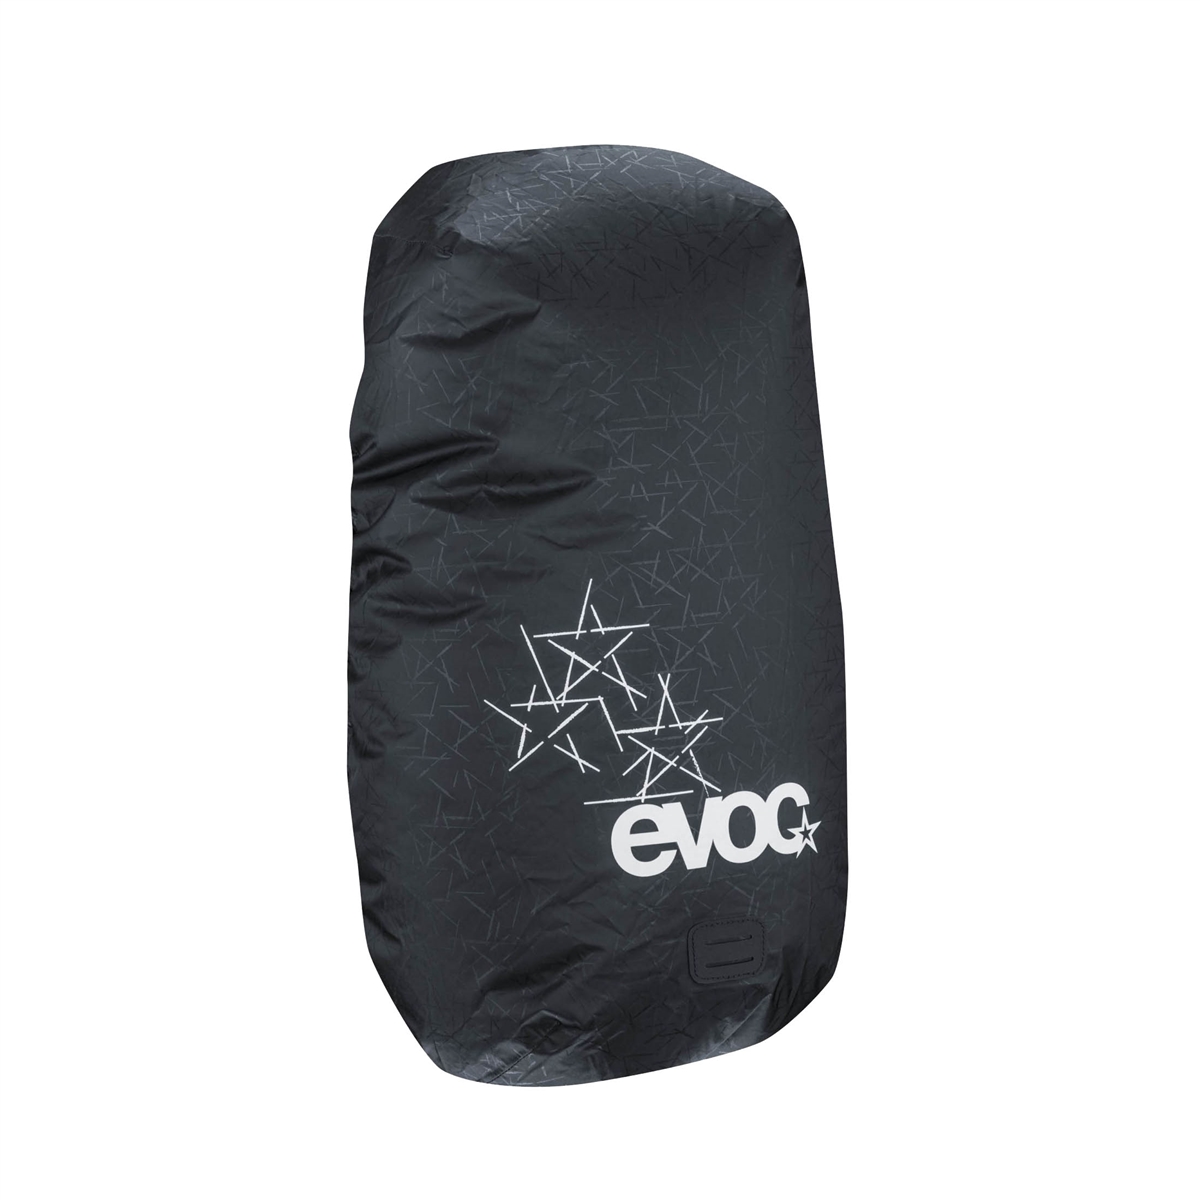 Raincover Sleeve black size M for backpacks from 10 to 25lt